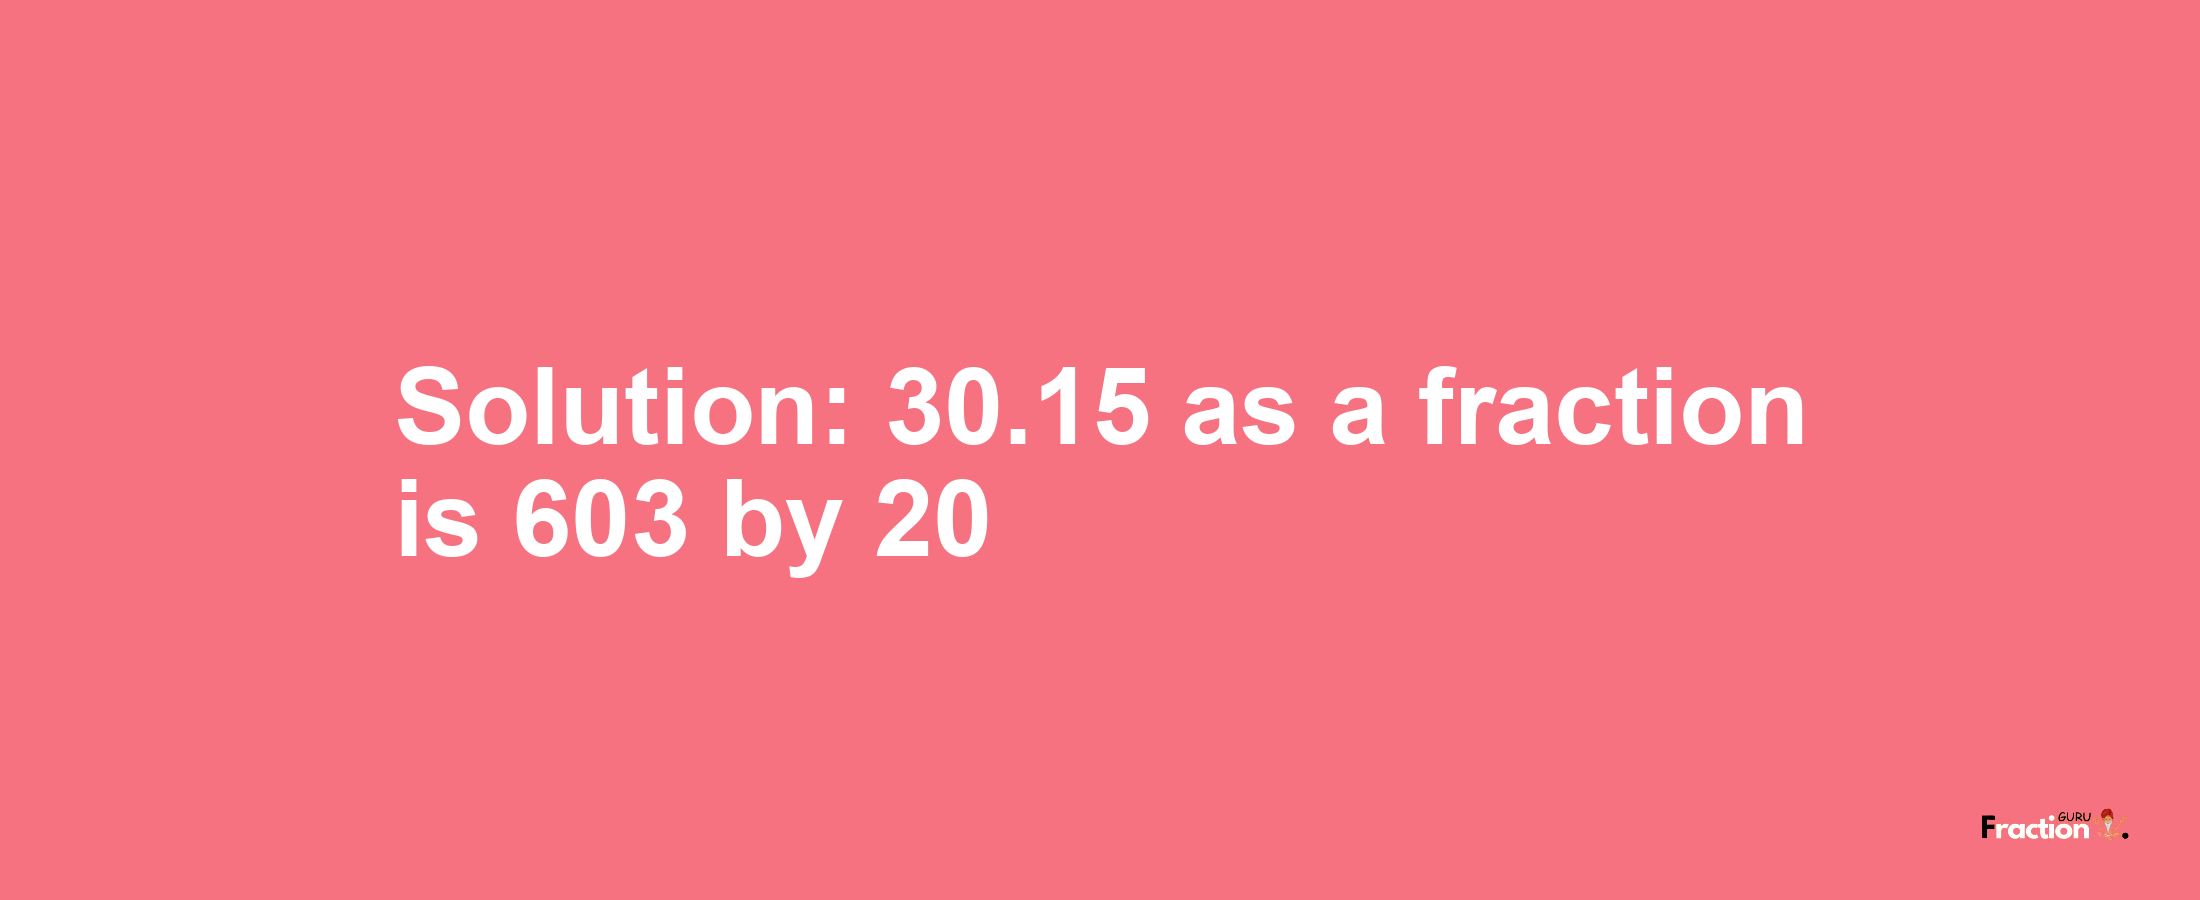 Solution:30.15 as a fraction is 603/20